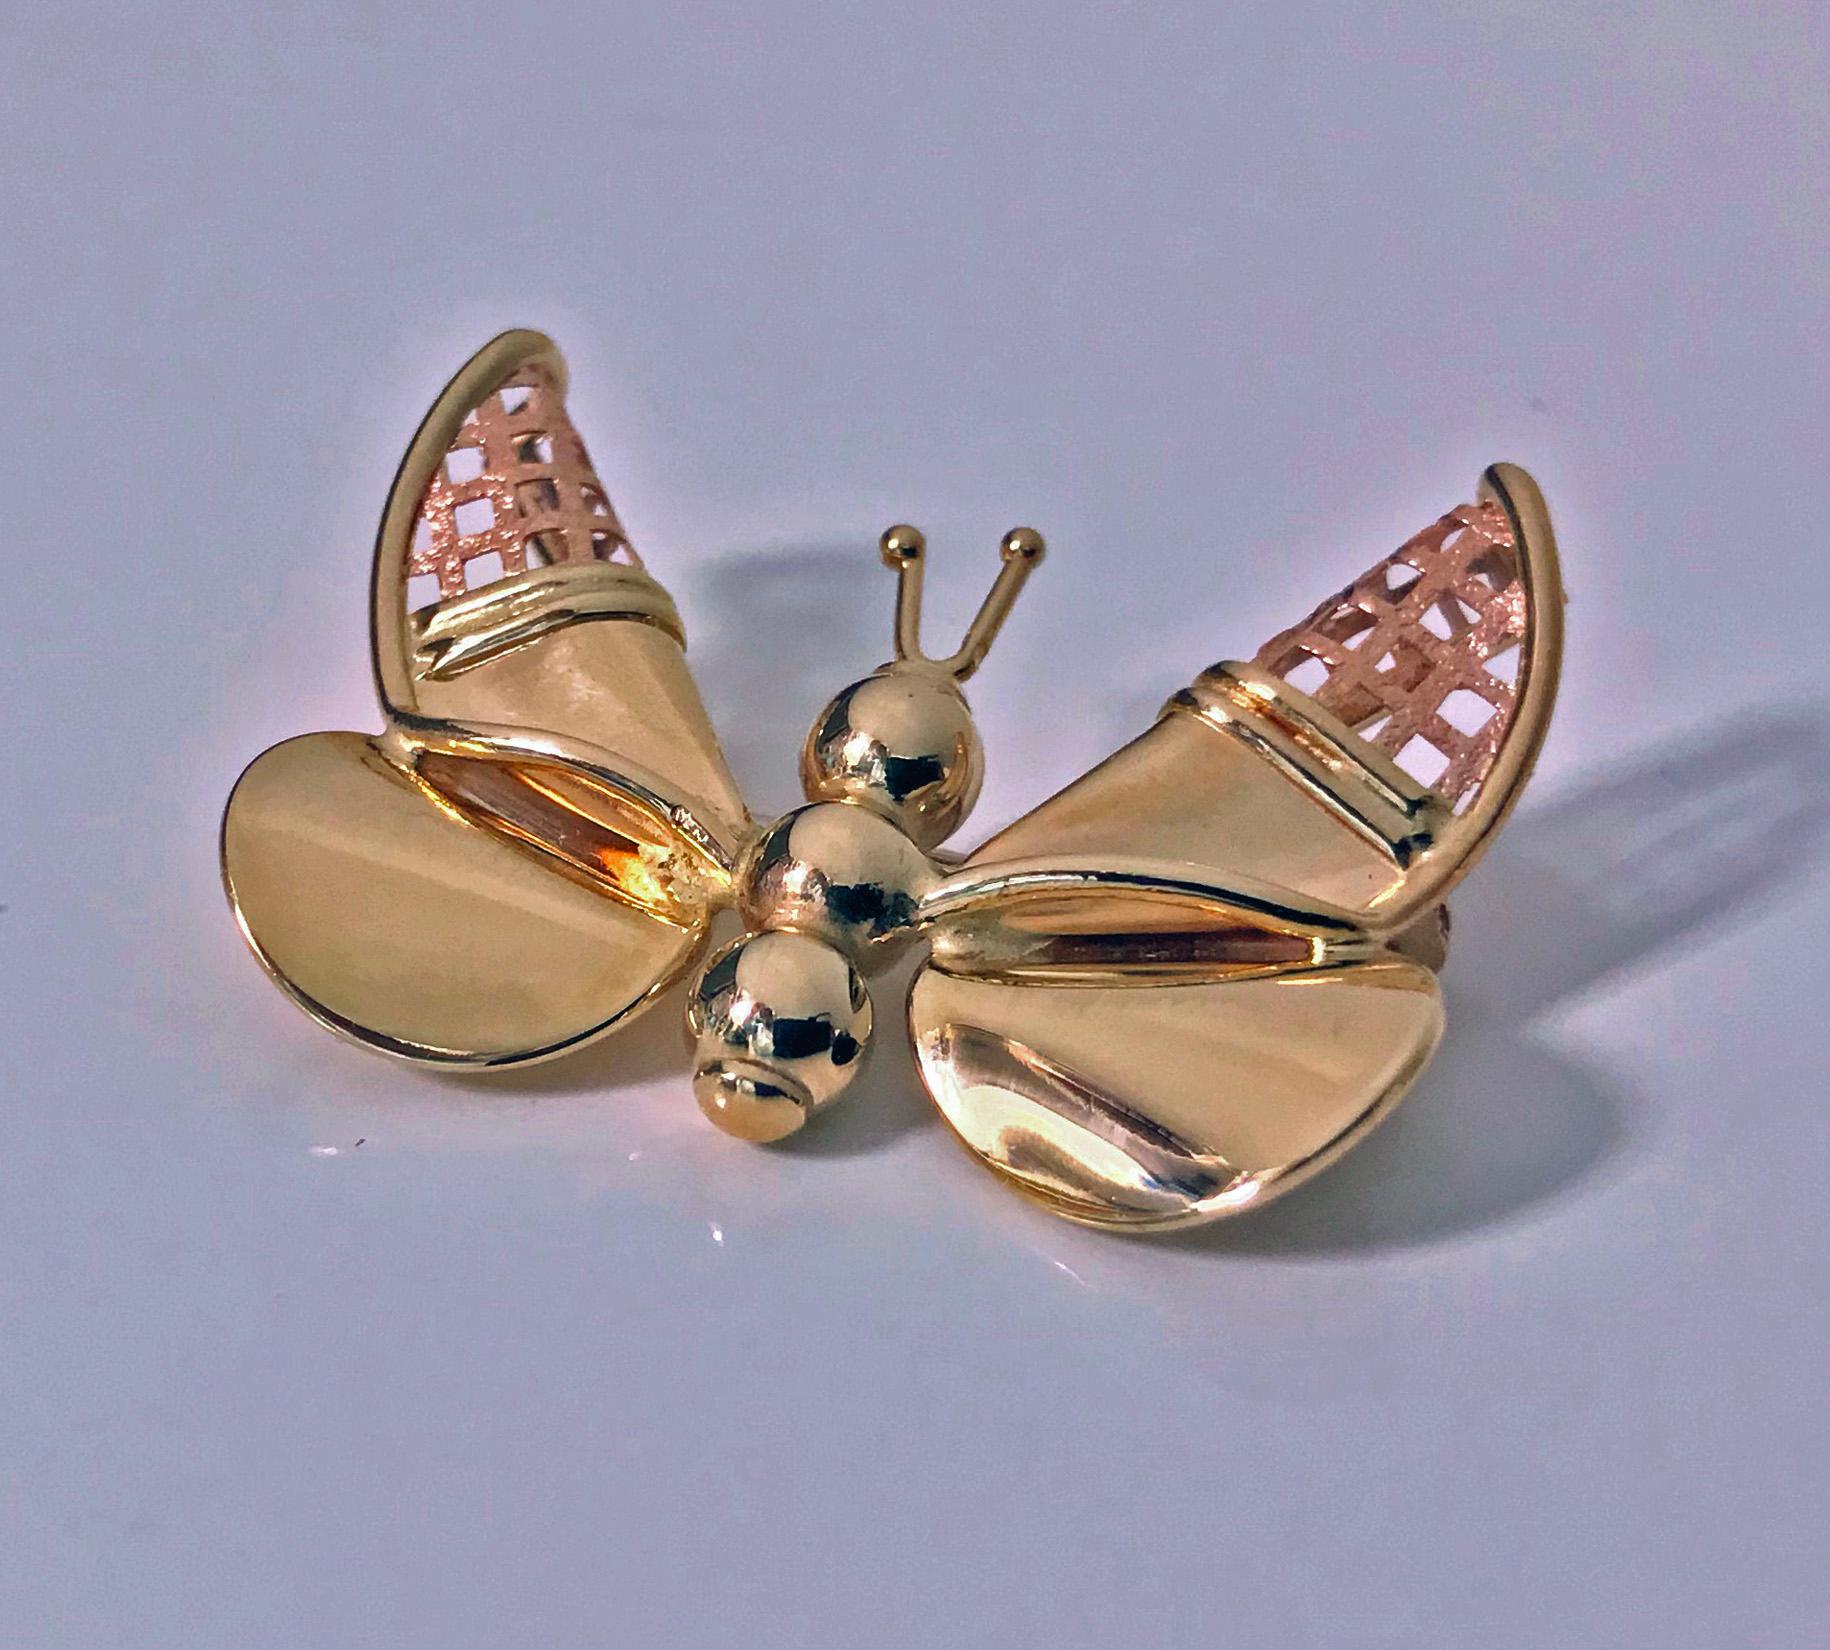 14K two colour Gold Butterfly Brooch. The antennae, abdomen and wings of polished yellow gold, the turned forewings of pierced textured rose colour gold. Stamped on reverse 14K Italy. Measures: approximately 1.50 x 1.0 inches. Item Weight: 6.02